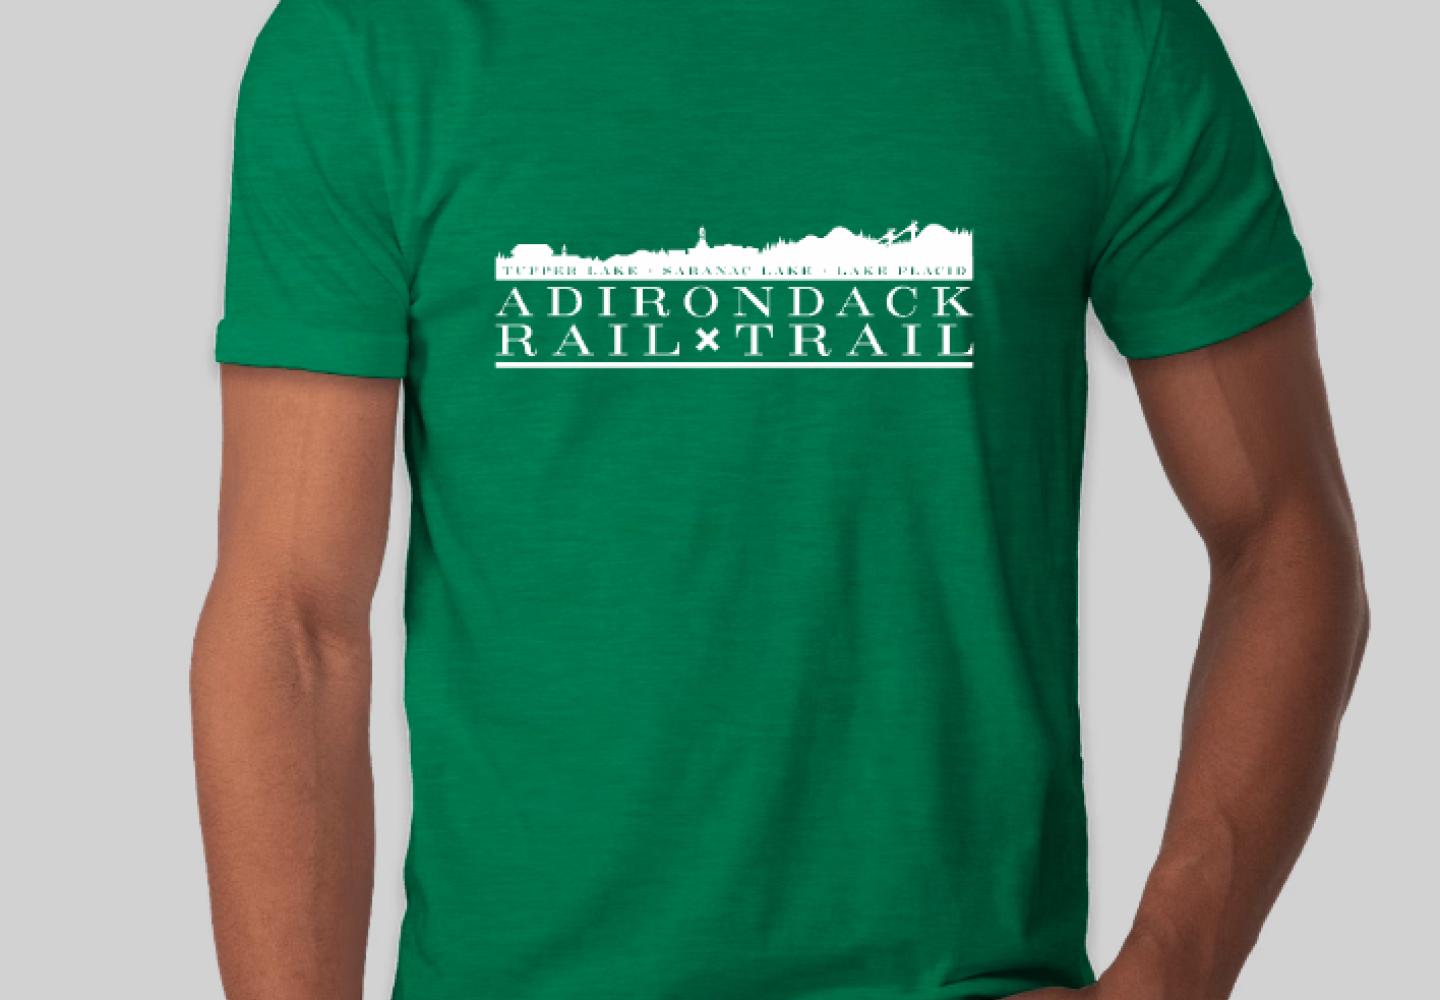 Proceeds from the sales of the new Adirondack Rail Trail t-shirt will help area kids purchase bikes.